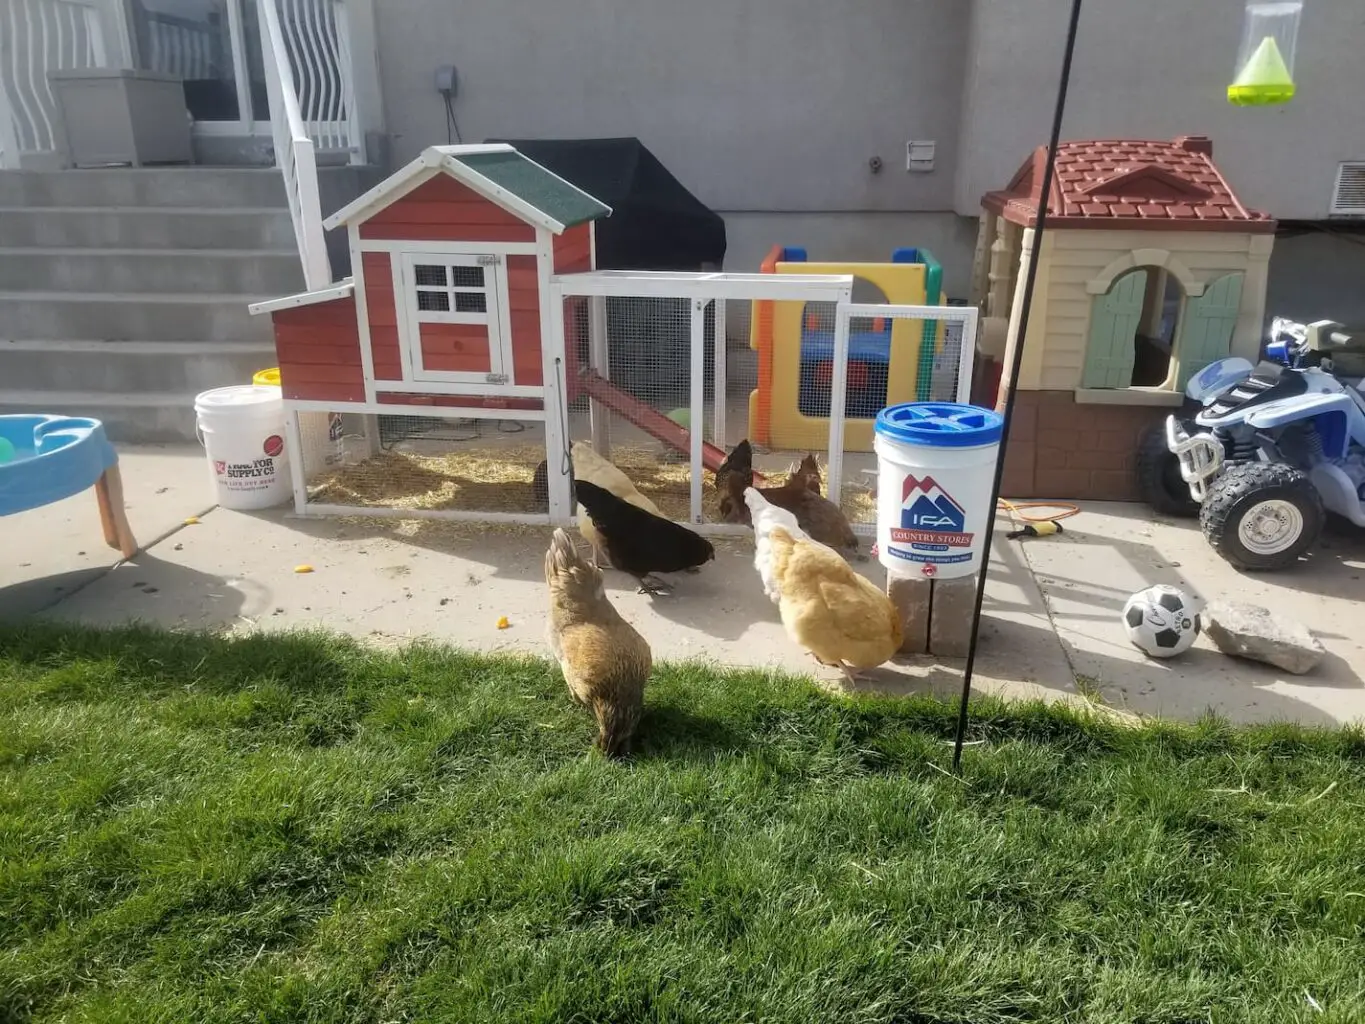 An image of our chickens in a little coop in our backyard homestead.